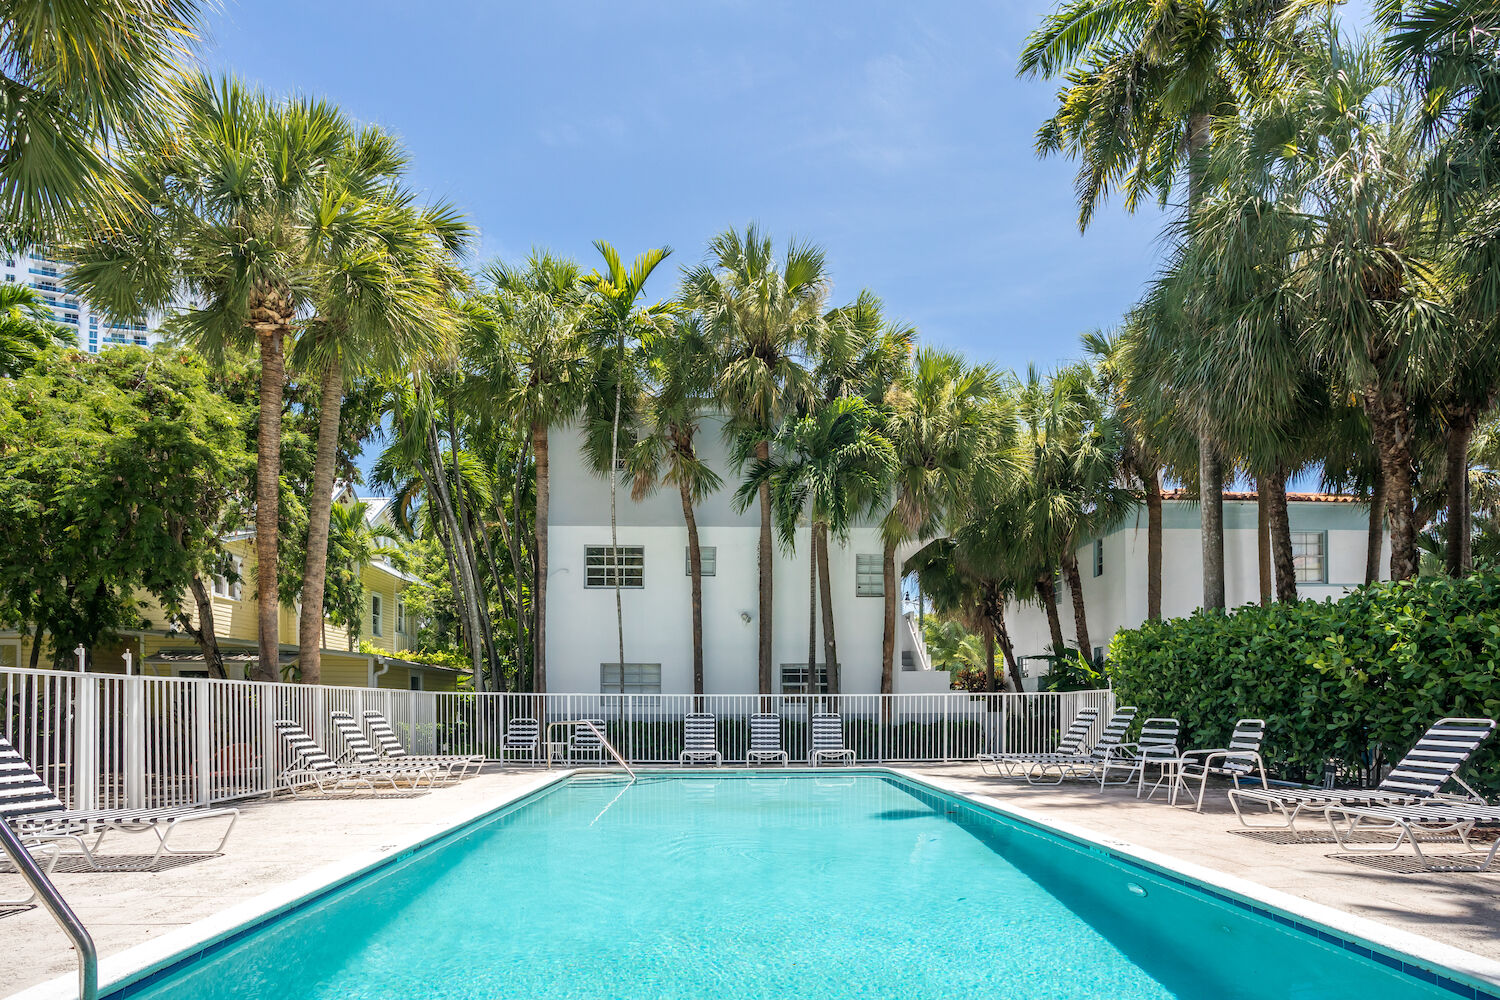 20 Hostels in Miami Beach 2023 (Price Comparison from $23)